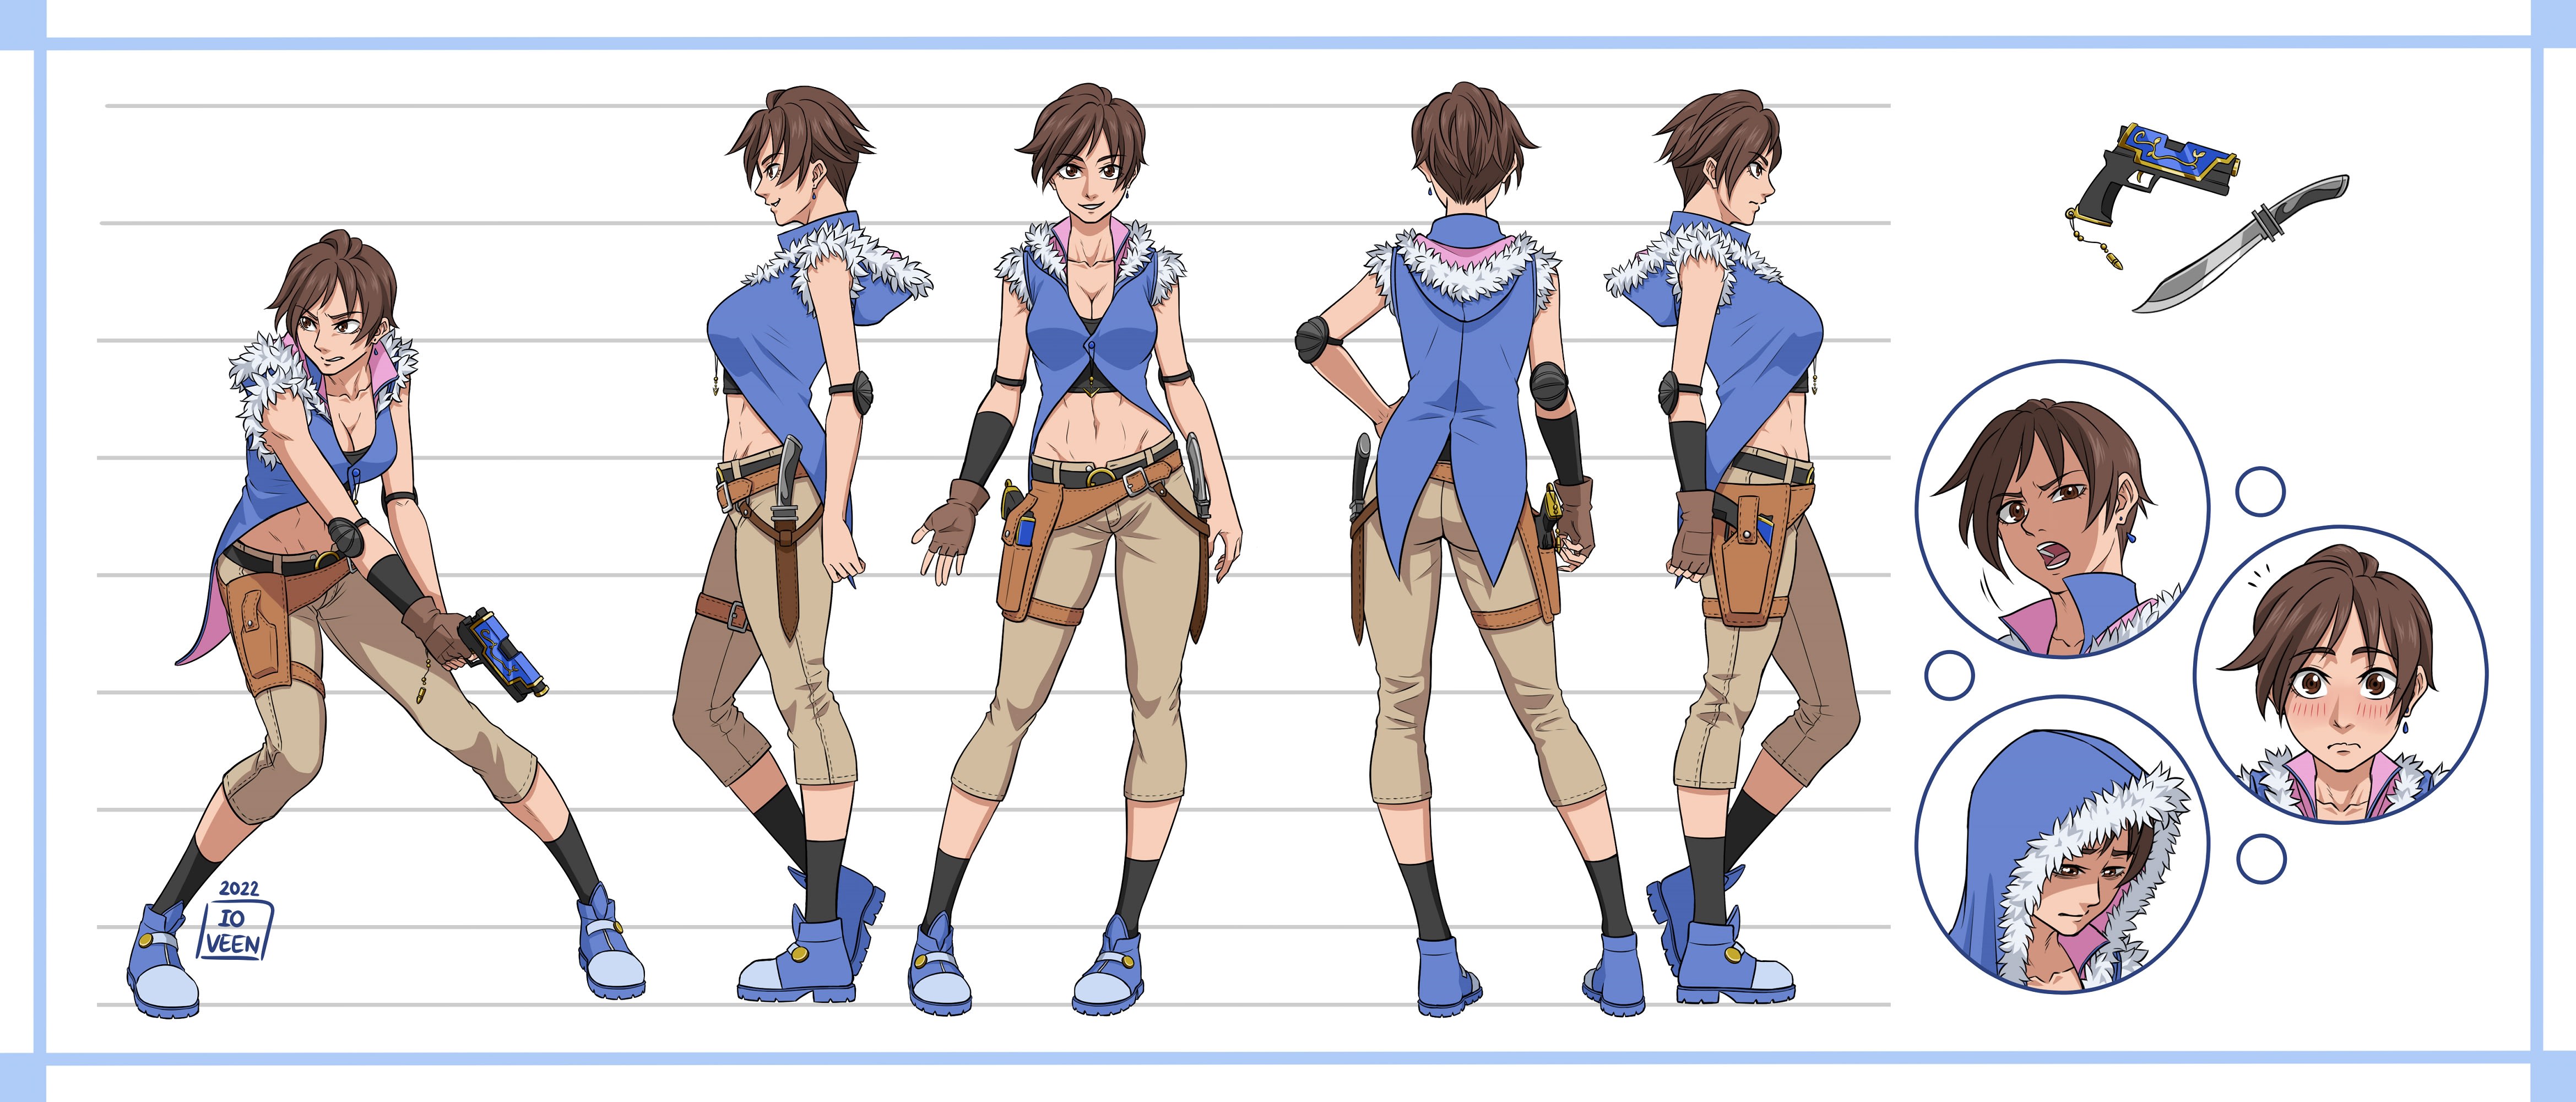 What are model sheets used for during Anime production  Forums   MyAnimeListnet